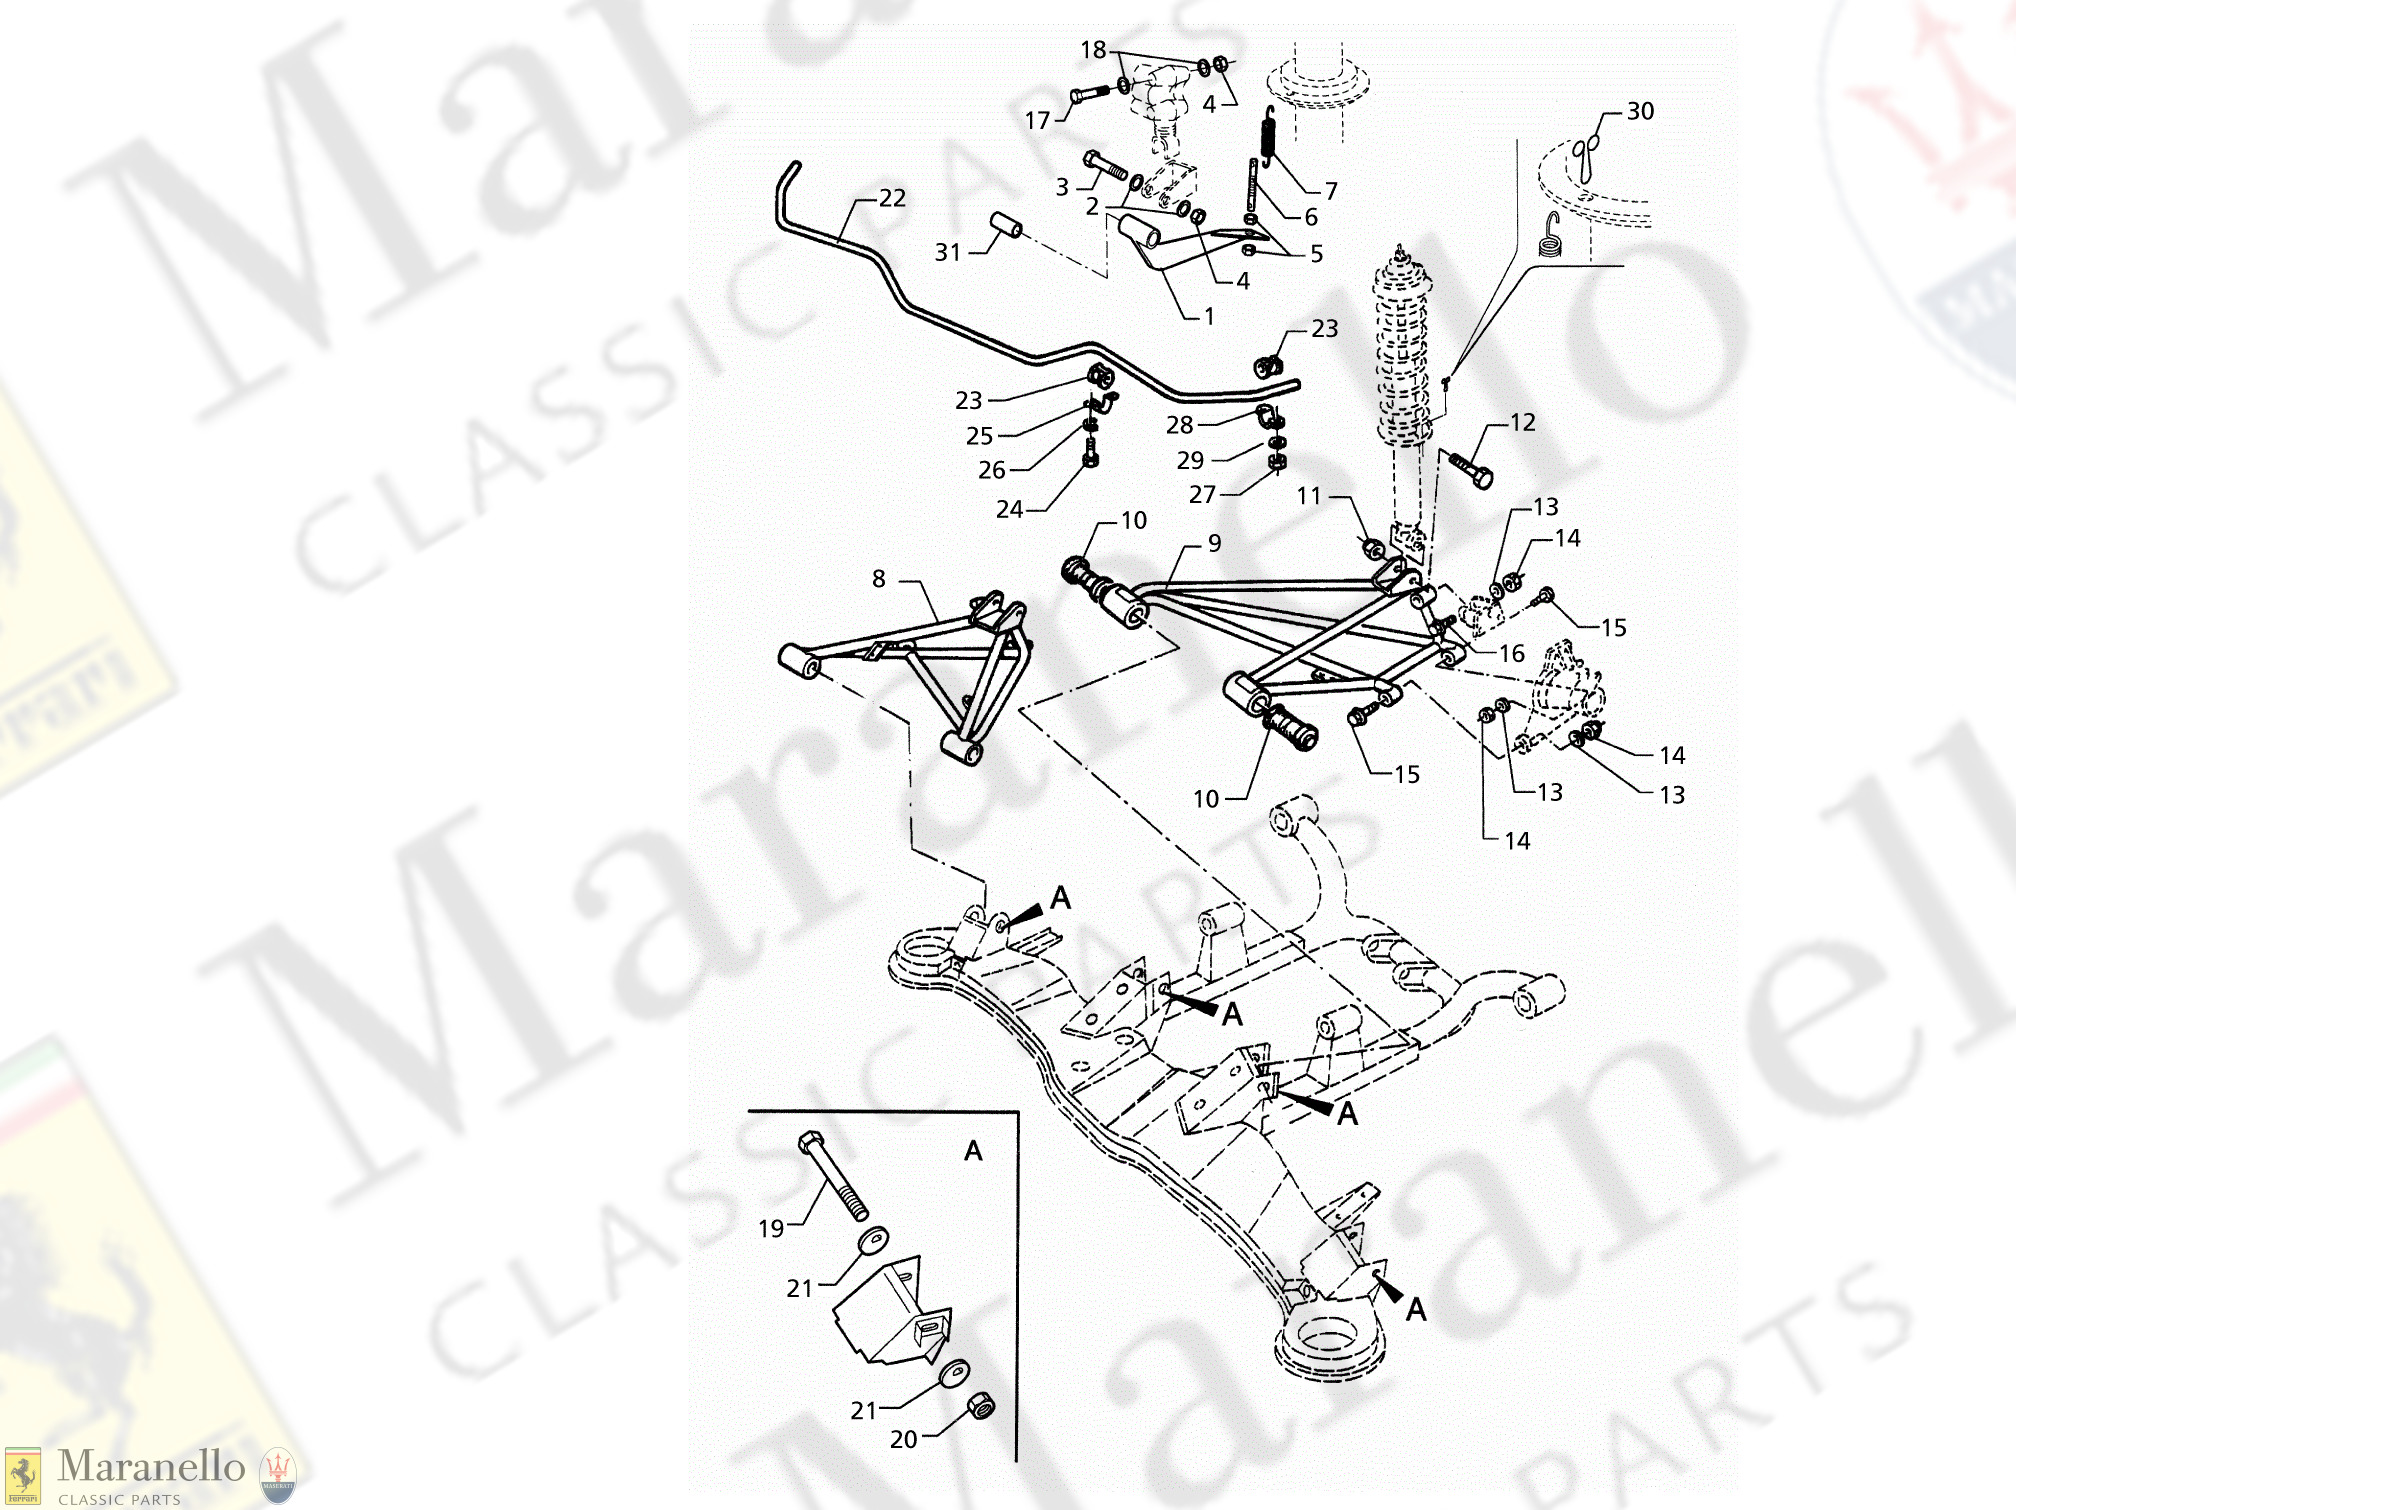 C 36.1 - C 361 - Rear Suspension And Anti-Roll Bar